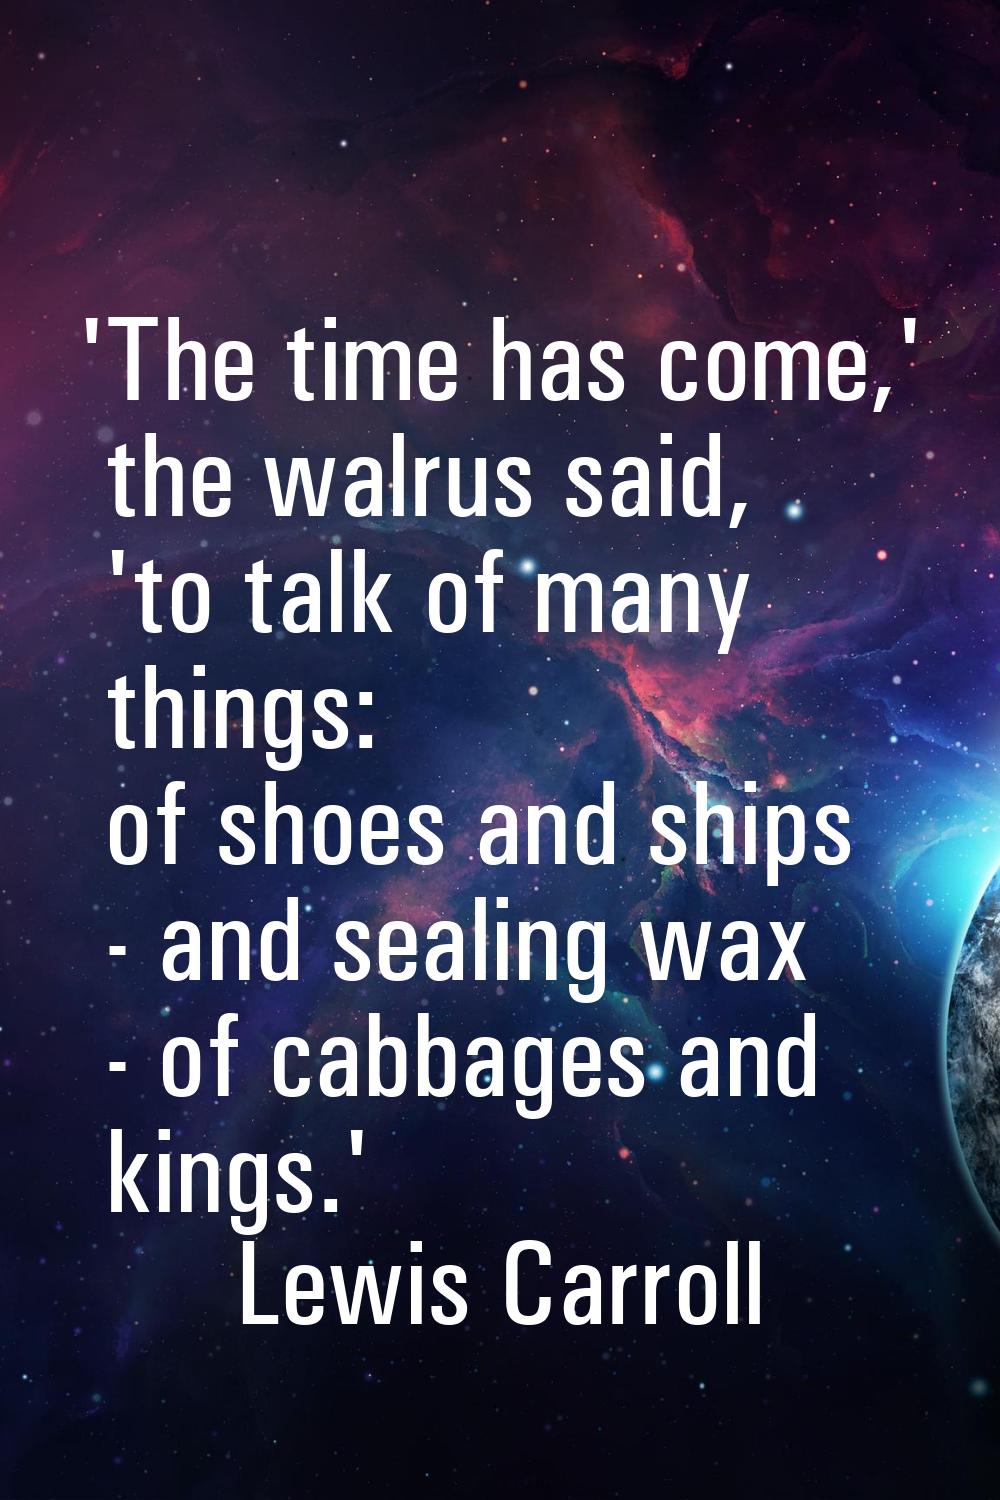 'The time has come,' the walrus said, 'to talk of many things: of shoes and ships - and sealing wax